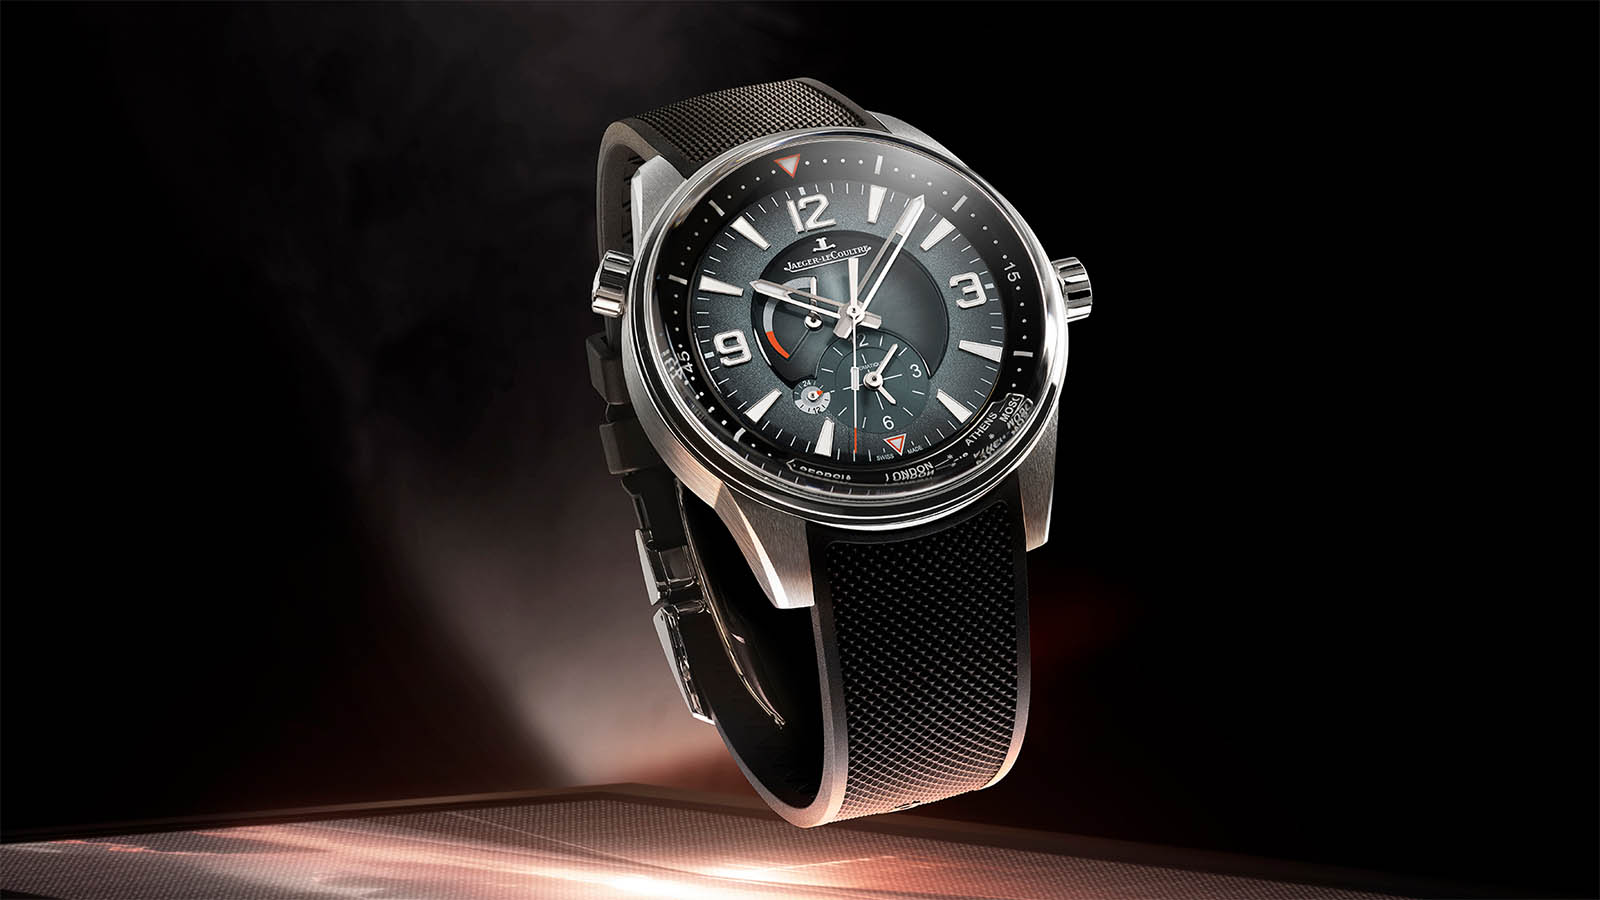 Jaeger-LeCoultre Updates Its Polaris Line With Three New Models